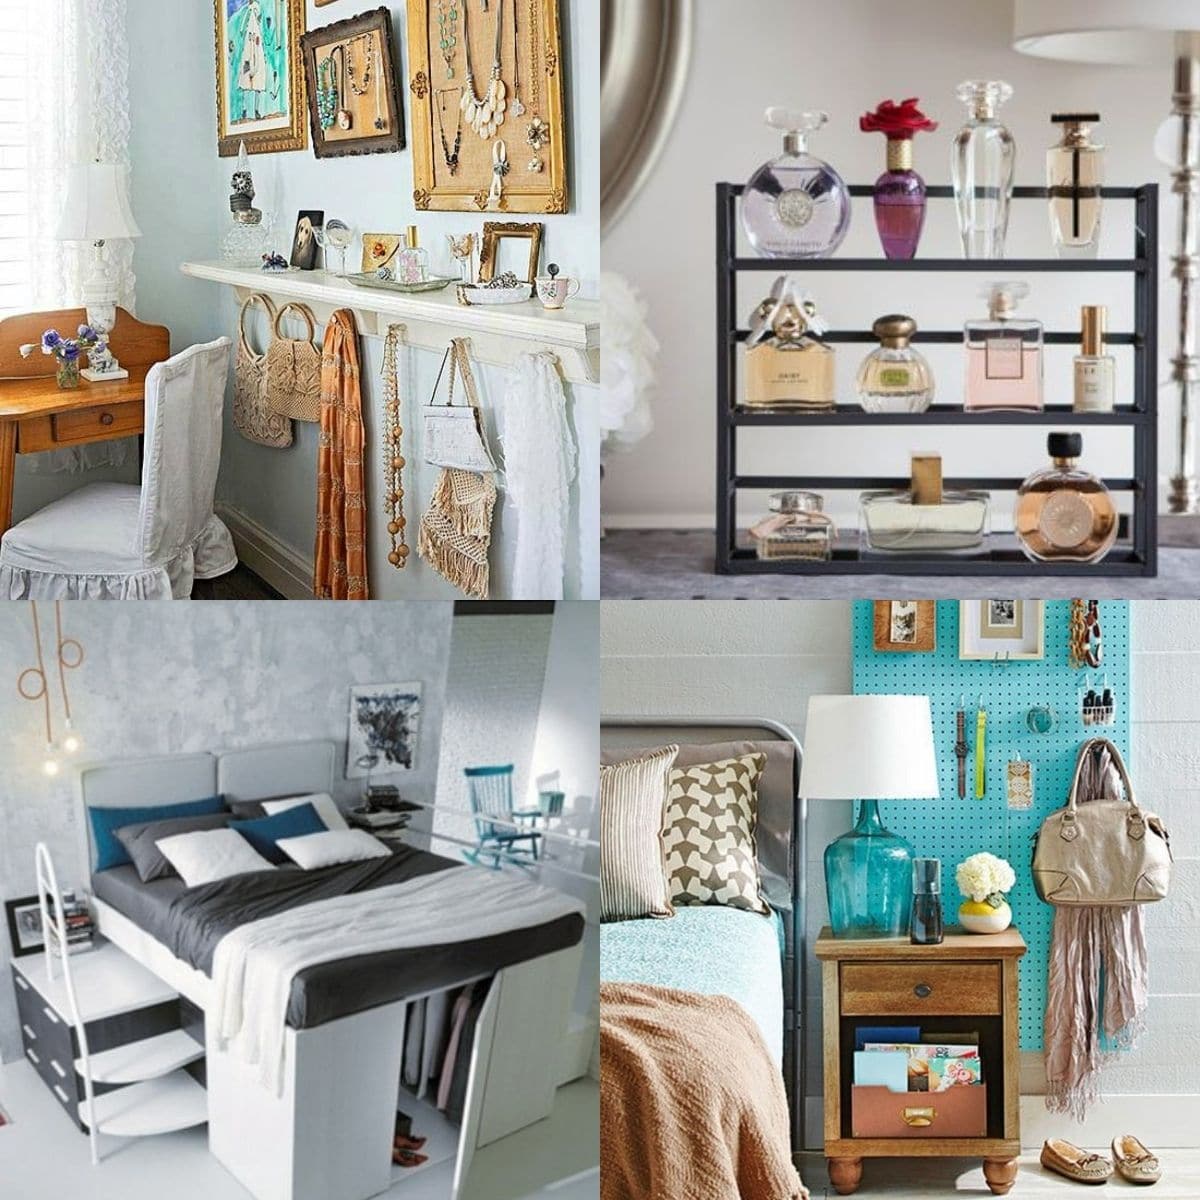 Increase storage in your small rooms with the fun hacks.

Keep your room both organized and stylish. 😉

#Storage #StorageIDeas #StorageSpace #SmallRooms #SmallRoomStorage #SmallRoomStorageIDeas

 LocalInfoForYou.com/71166/small-ro…